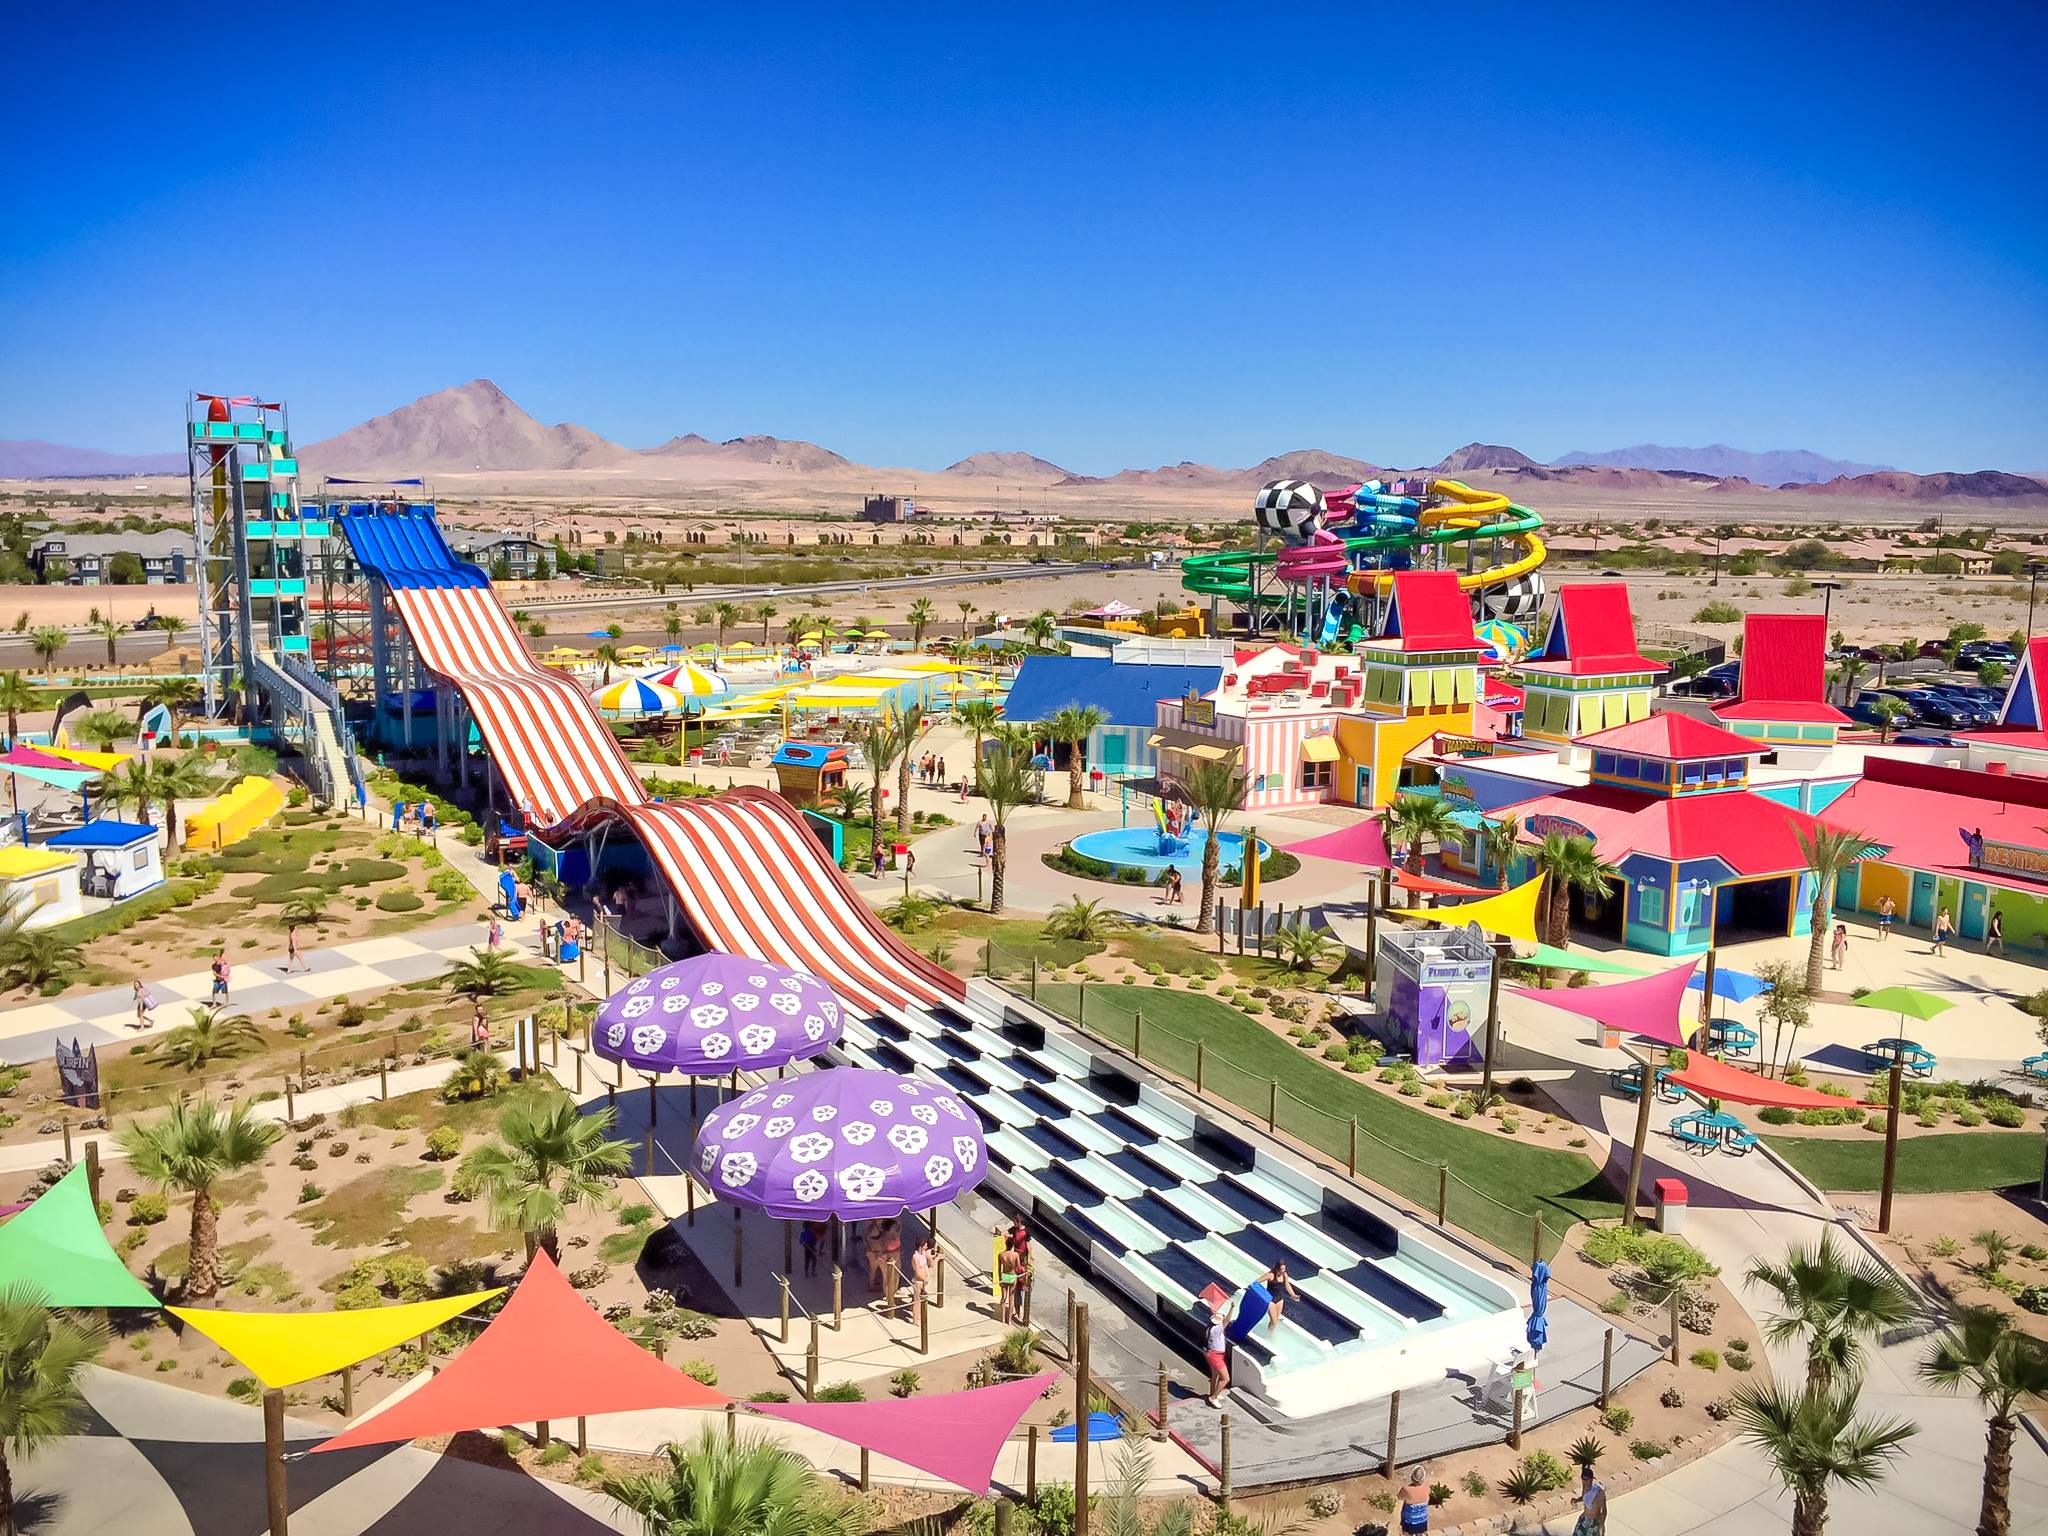 Cowabunga Bay Water Park In Nevada Is The Most Fun You’ve Had